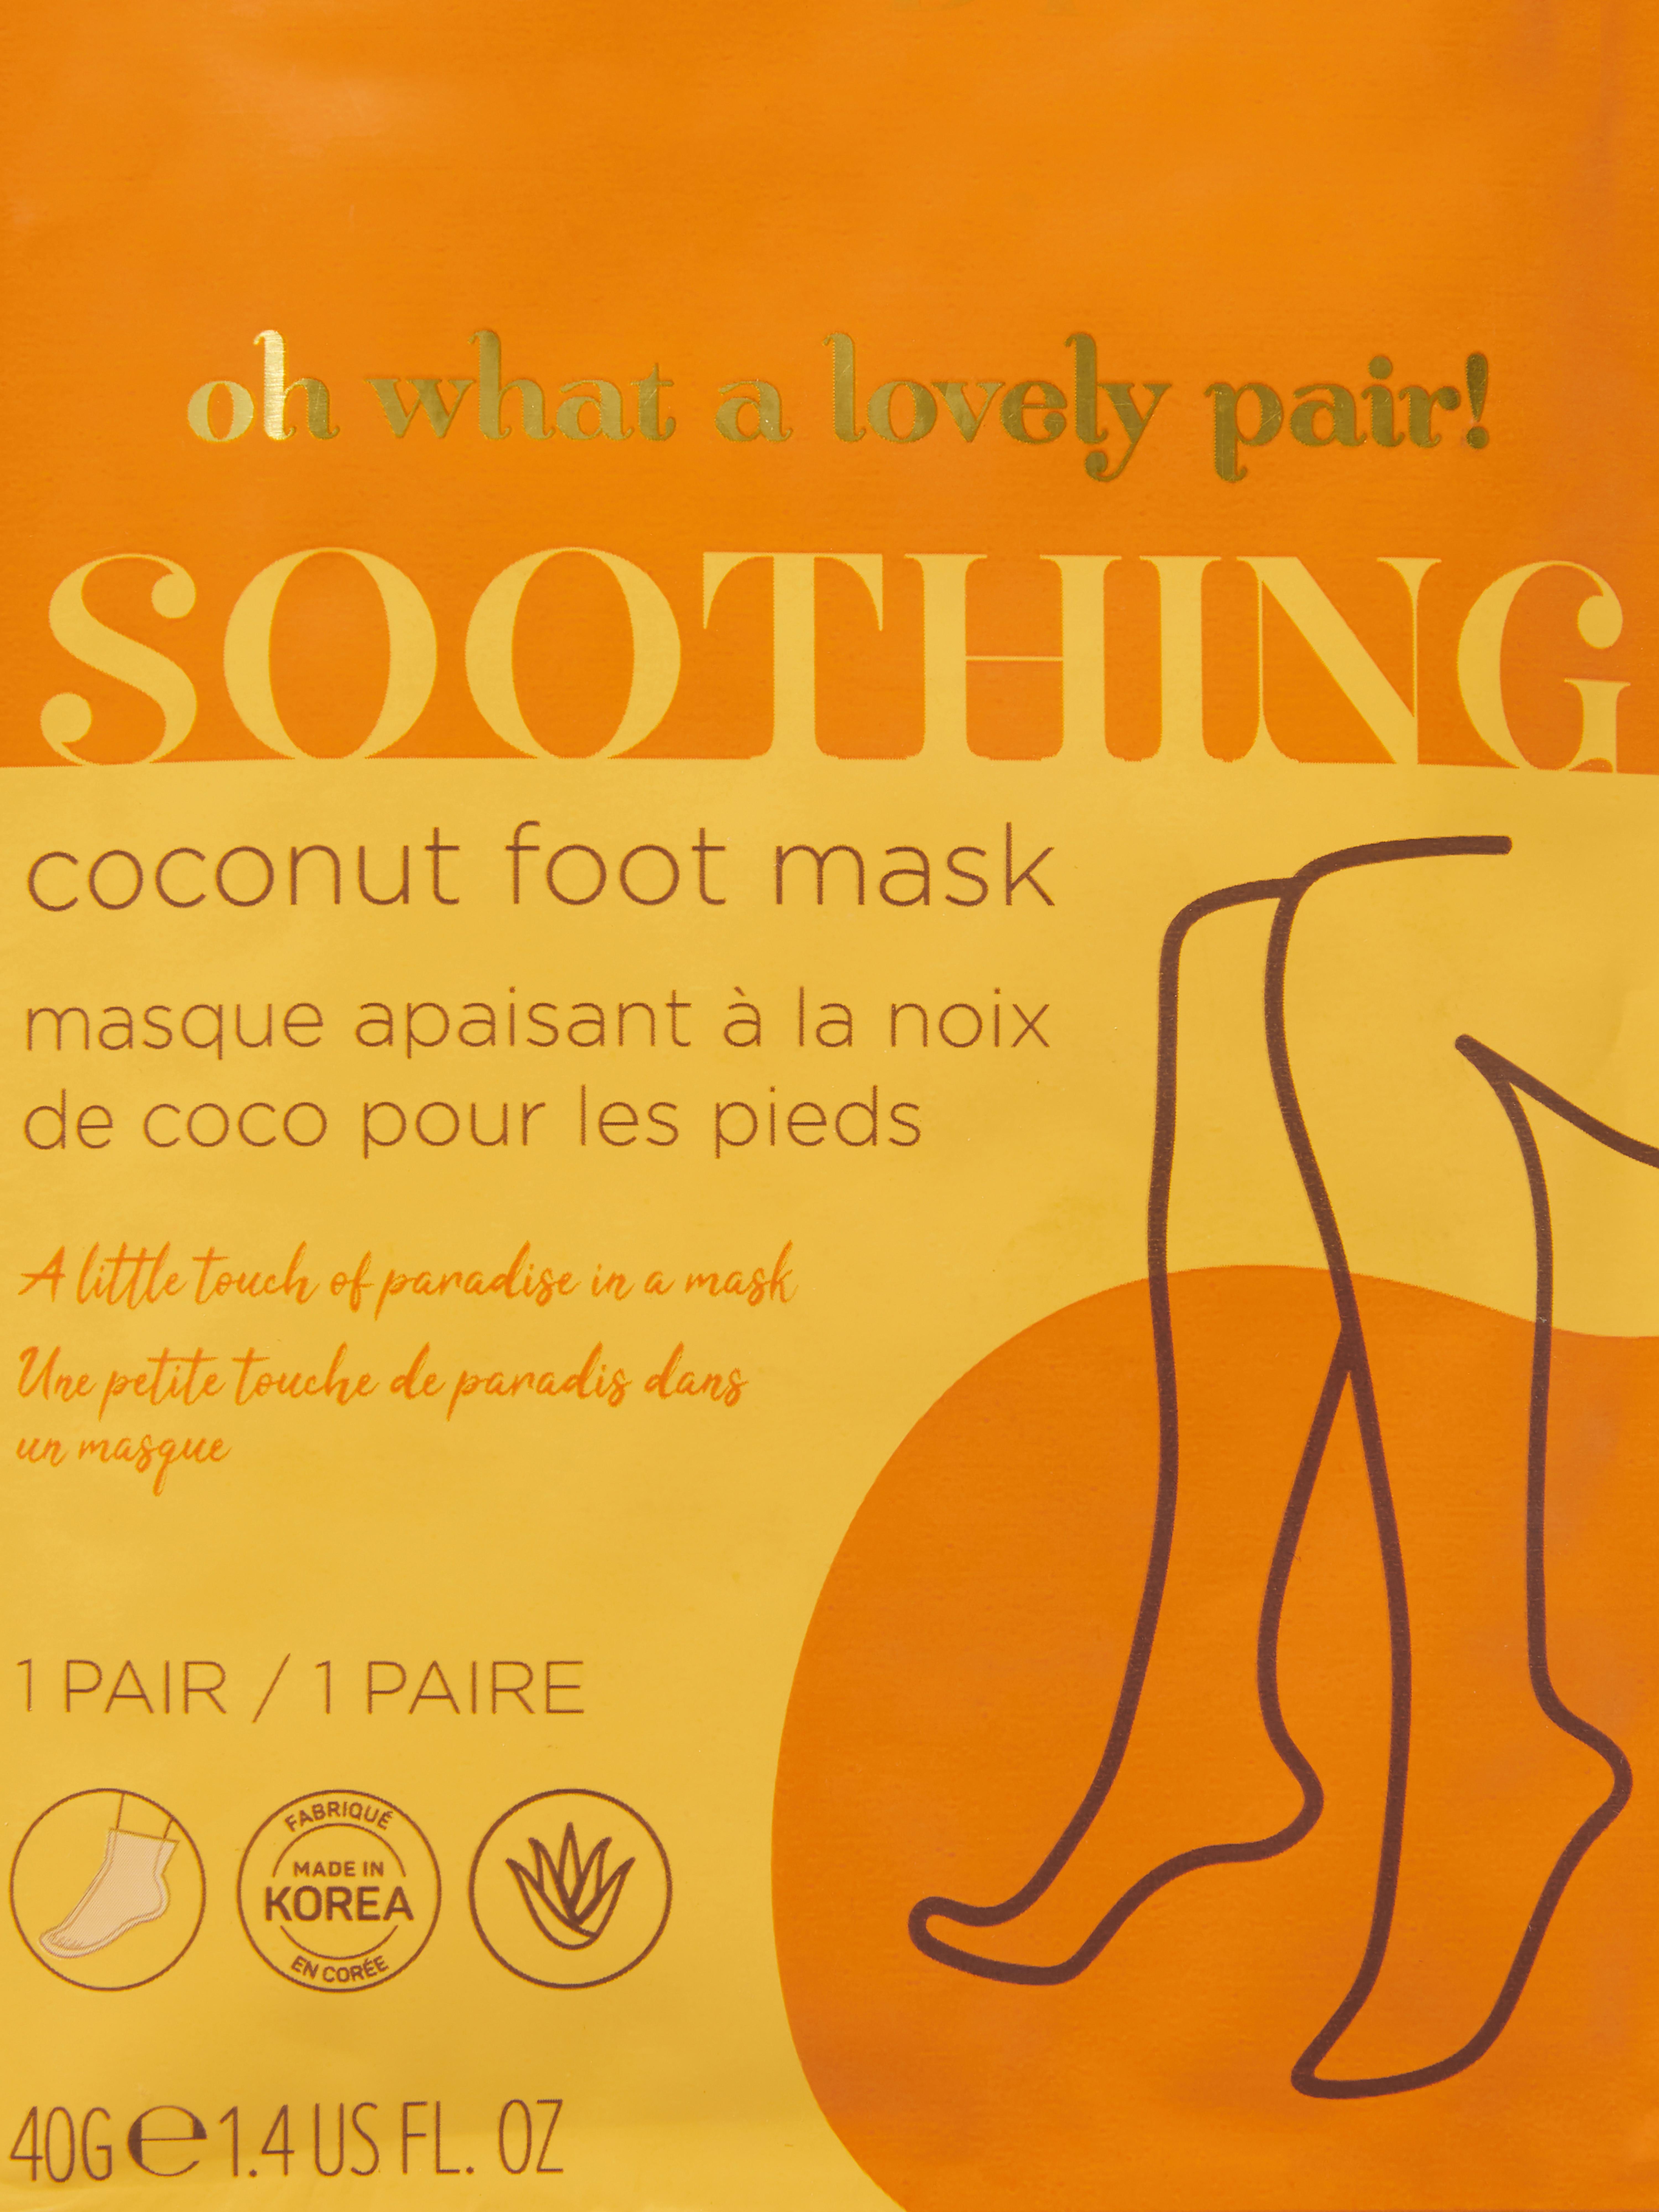 PS... Soothing Coconut Foot Mask